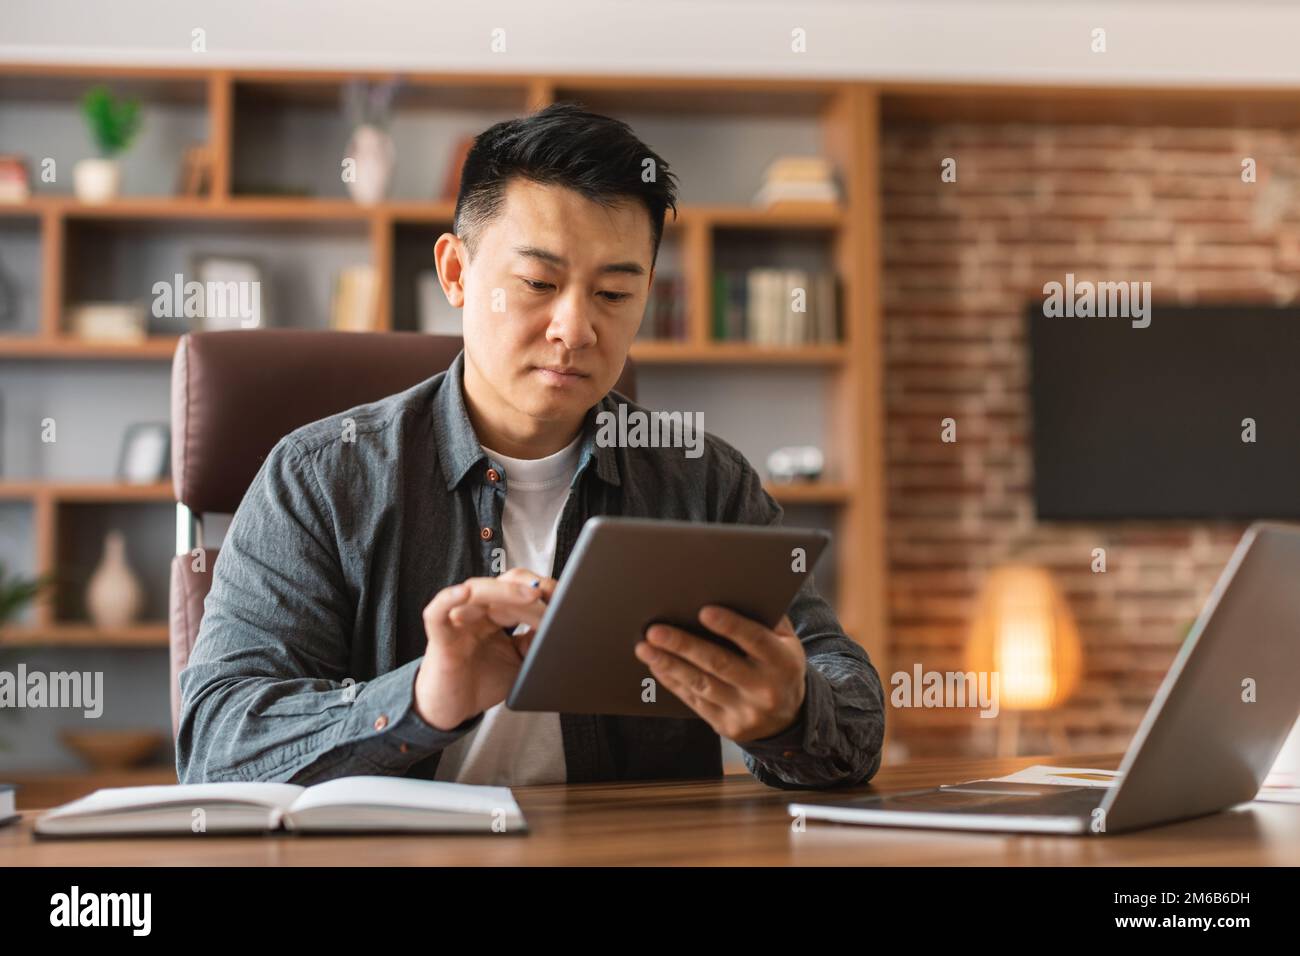 Serious concentrated middle aged asian guy typing on tablet, planning startup, analyze data at workplace Stock Photo